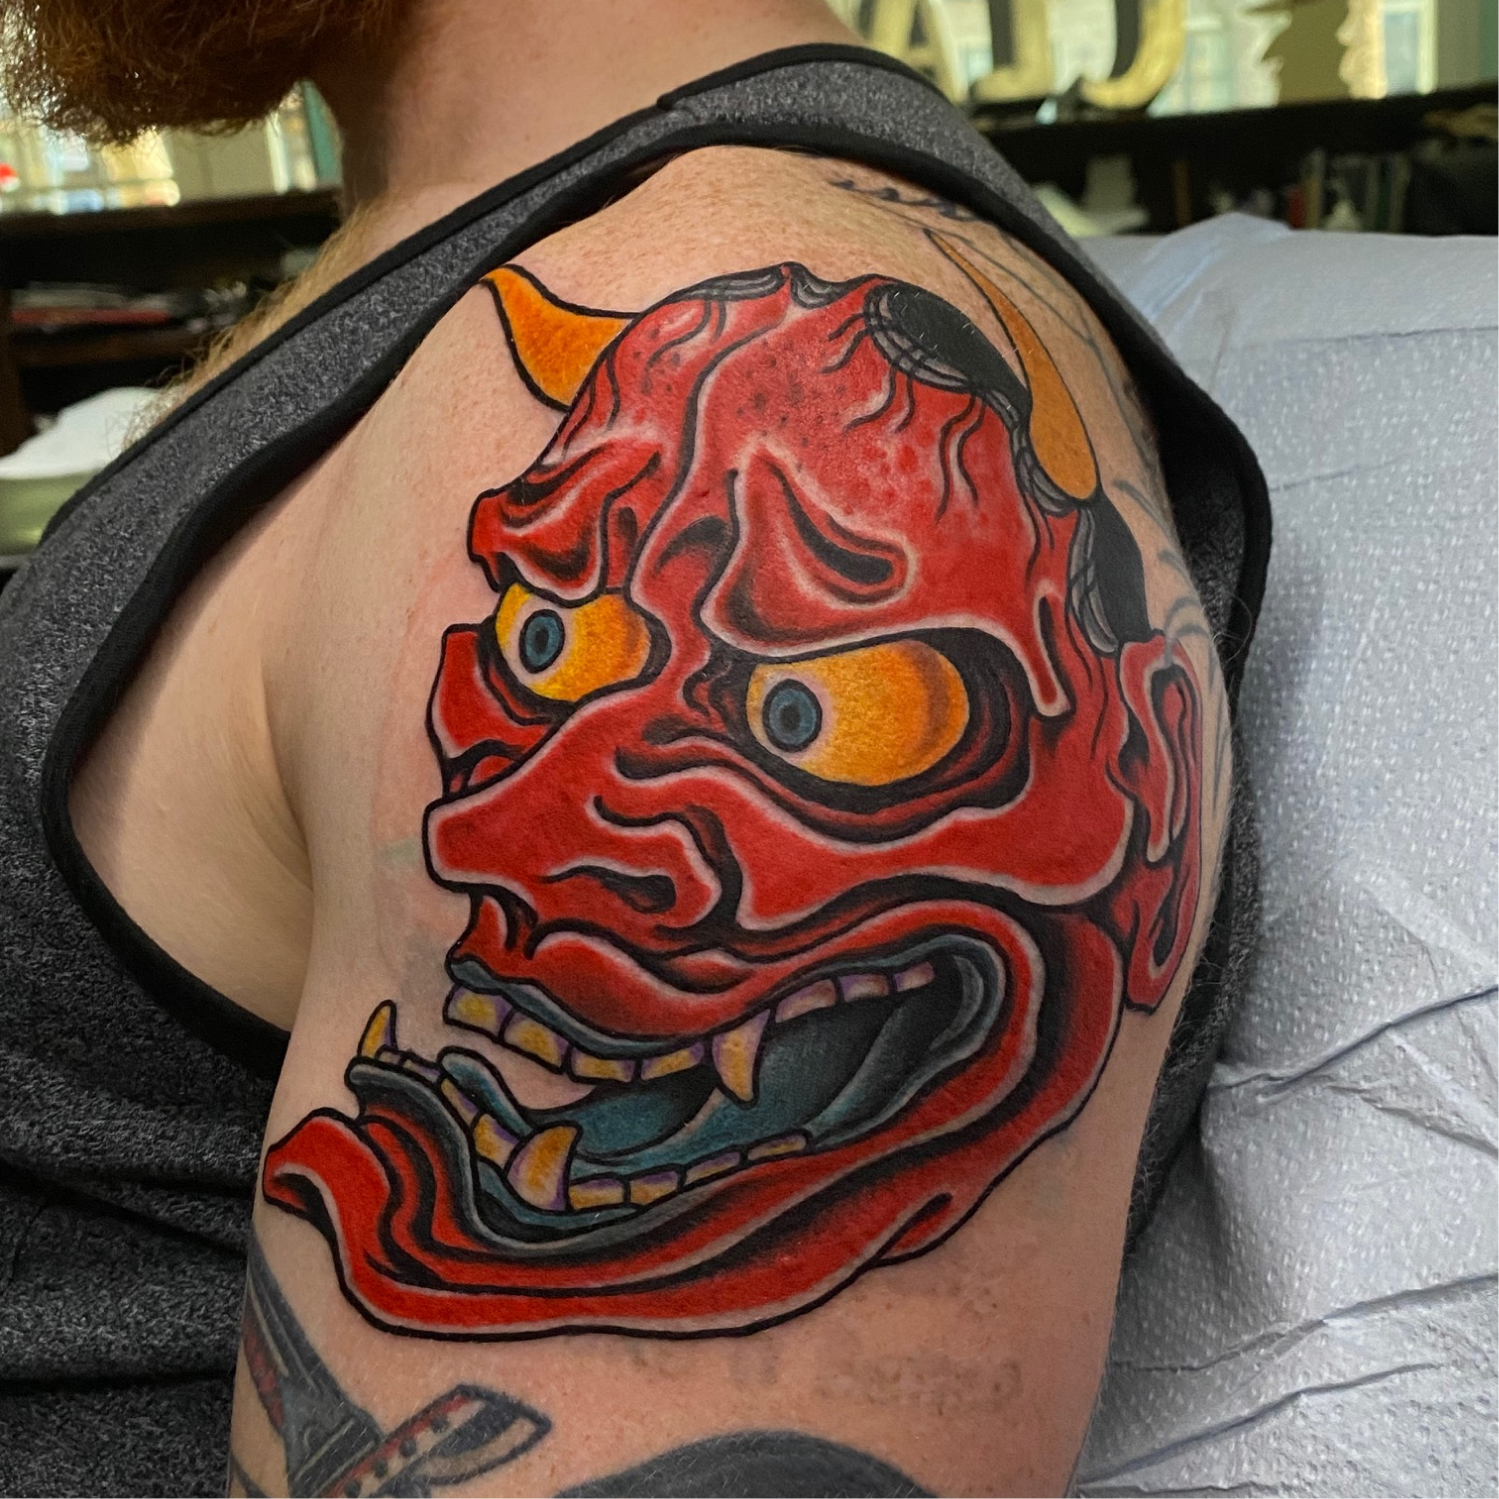 AMULET TATTOOS on Instagram Hes been growing on me richardsmithtattoo  amulettattoos stpete dtsp stpetersburg stpetersburgflorida  stpetersburgfl bng bngtattoo